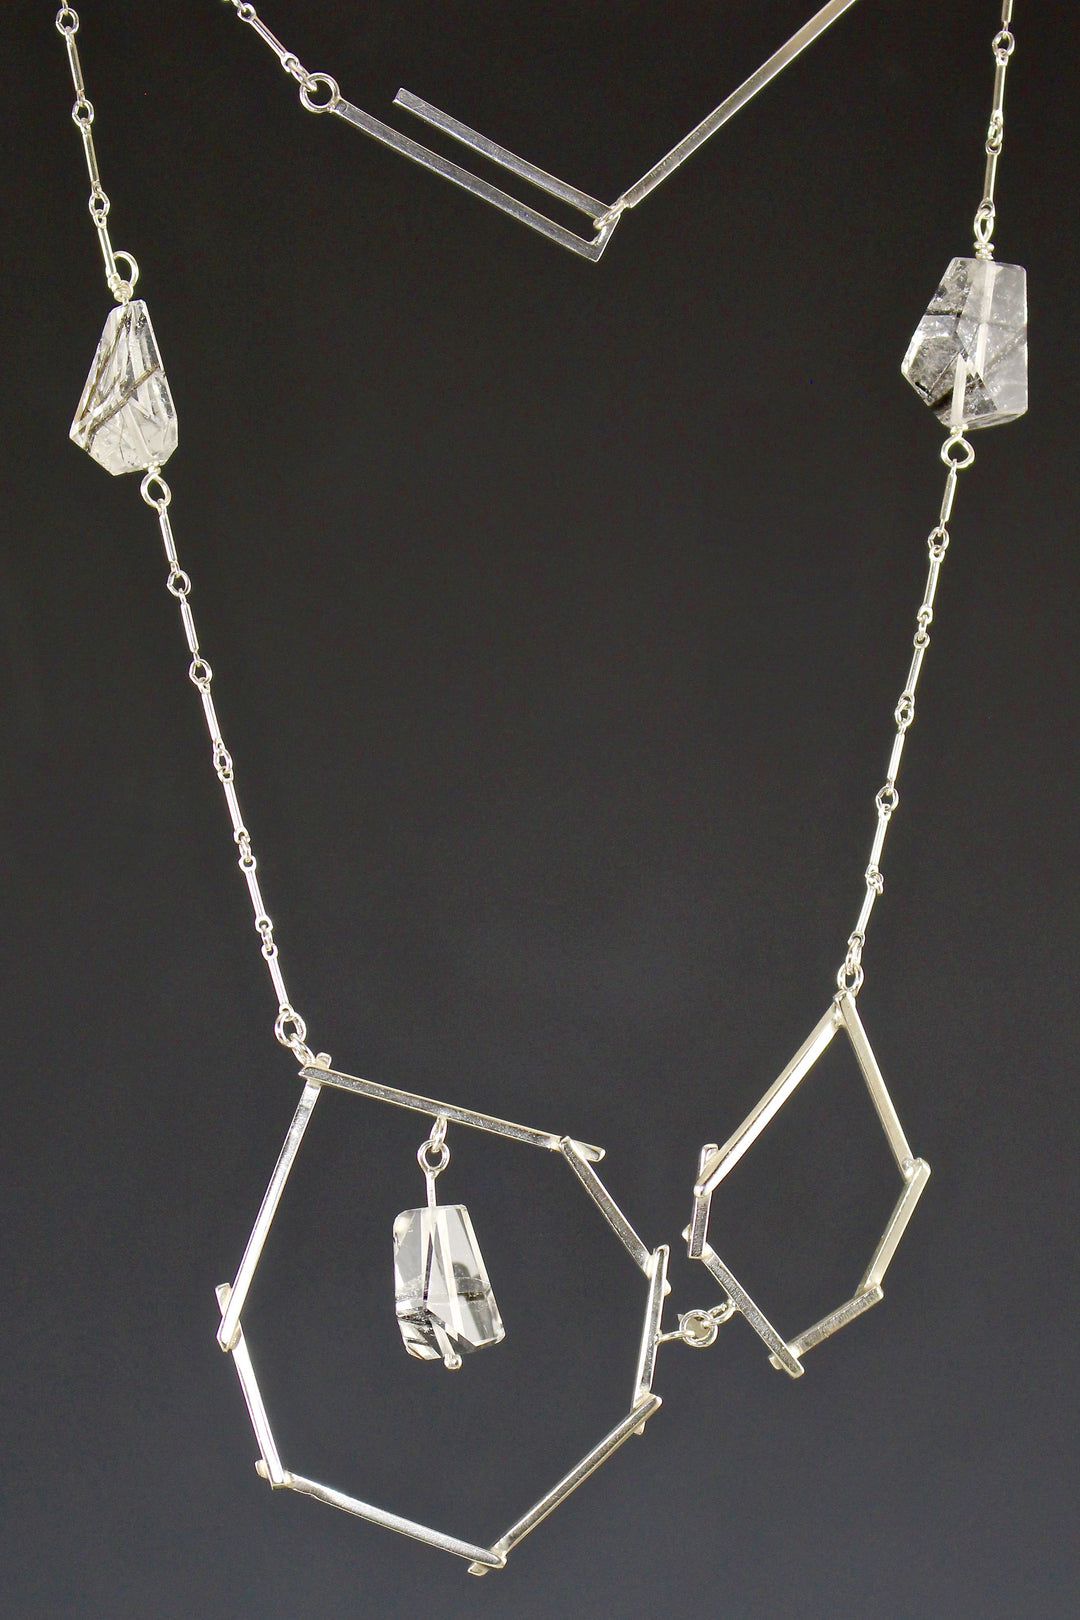 Full view of sticks and Stones necklace. On the sides of the necklace there are two pieces of tourmalated quarts in the middle of the chain.